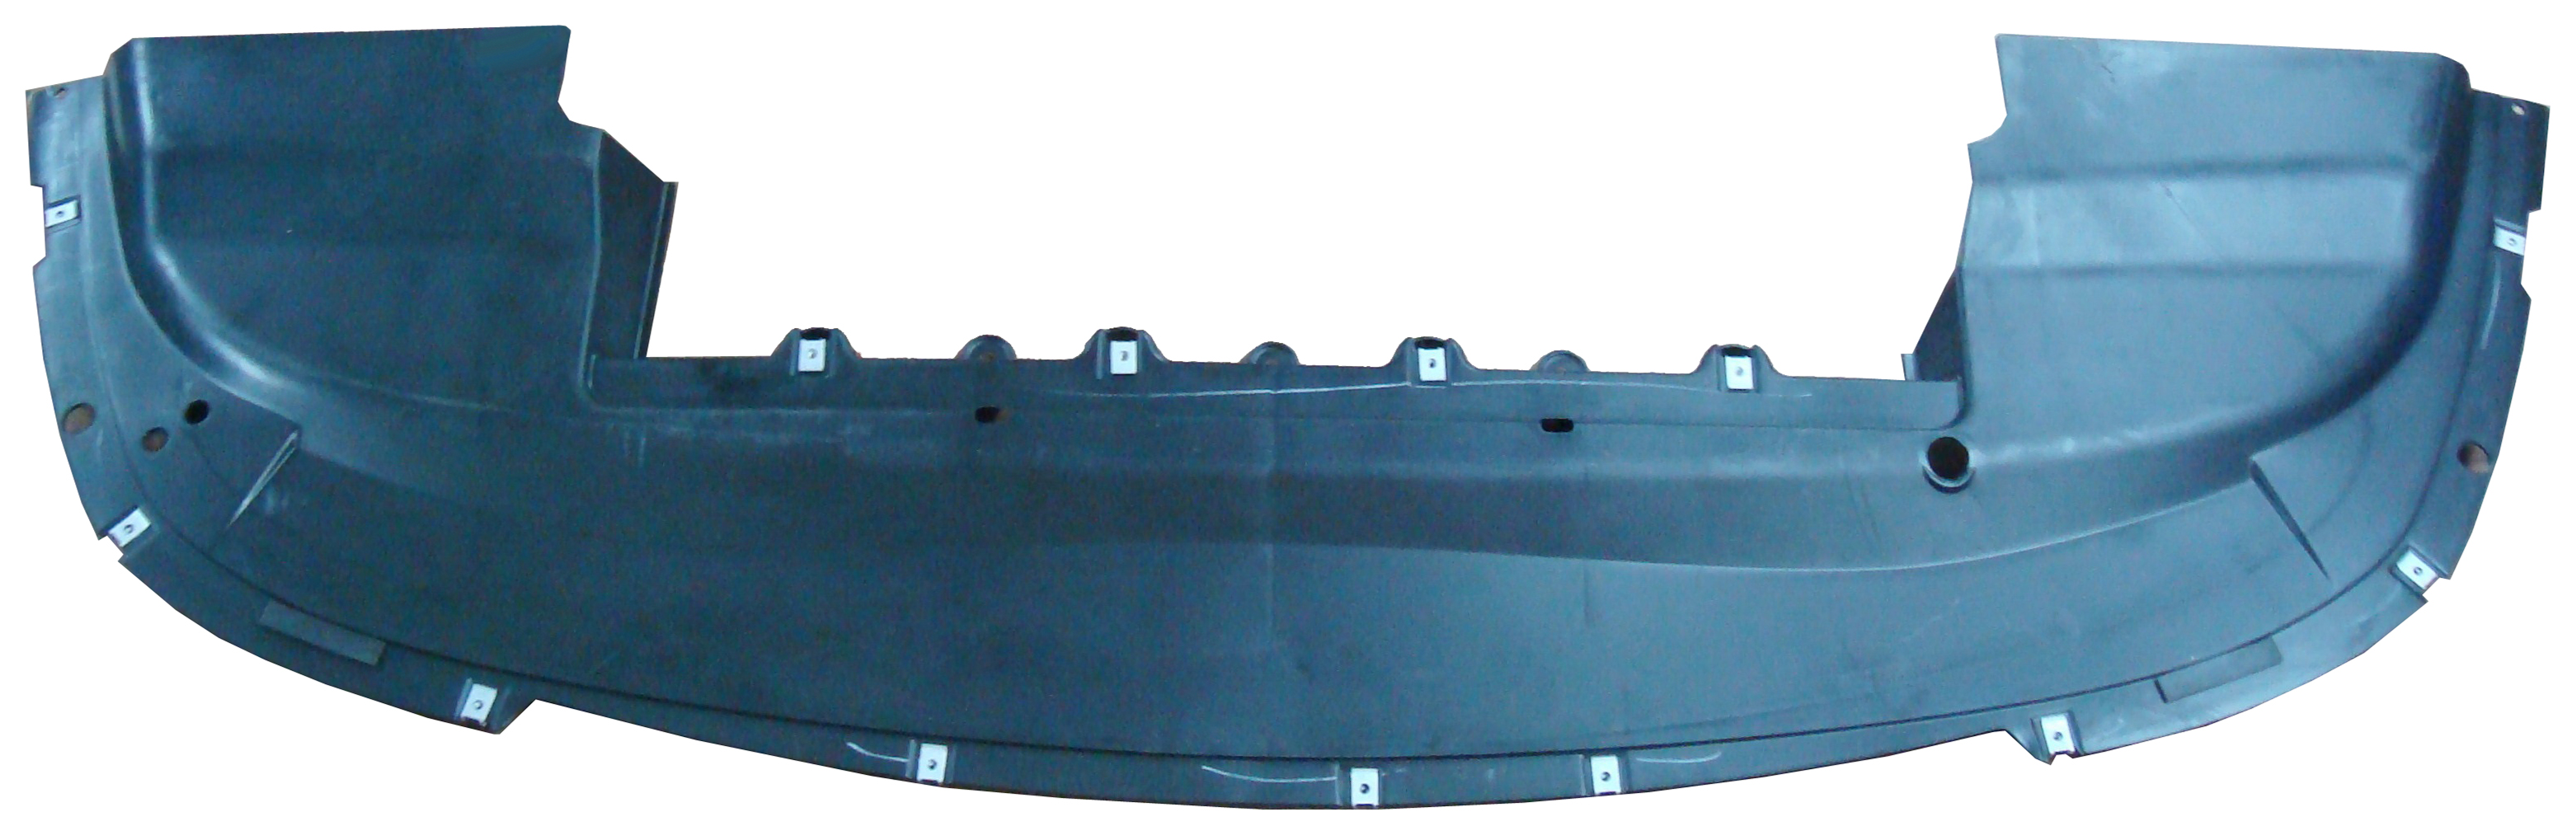 Aftermarket UNDER ENGINE COVERS for CHRYSLER - 200, 200,11-14,Front bumper air shield lower